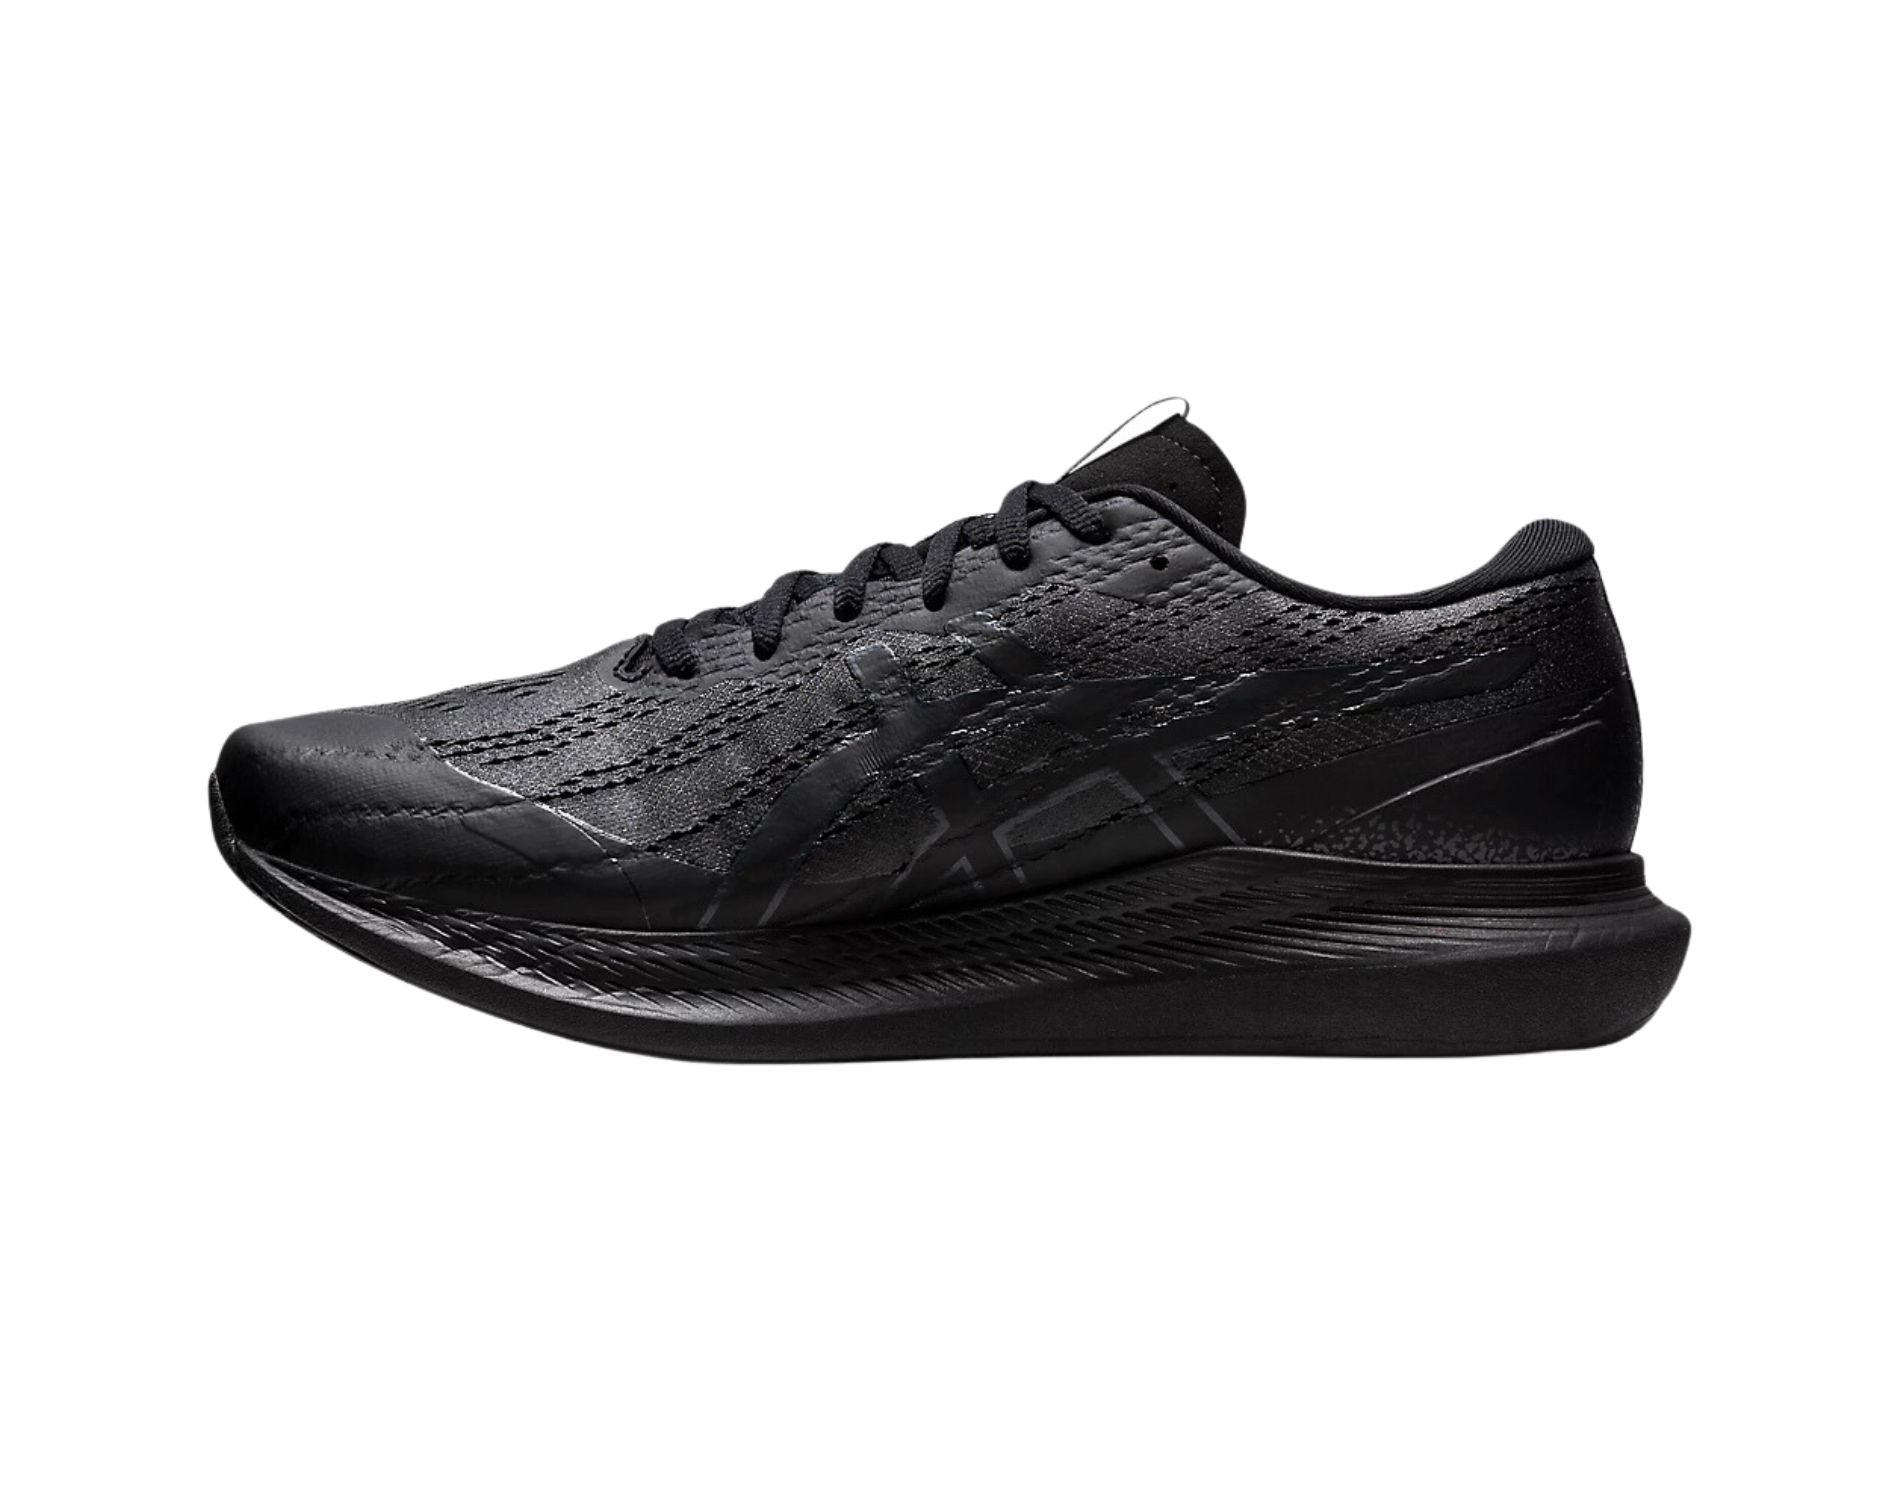 asics walkride ff in black and graphite grey colours facing left